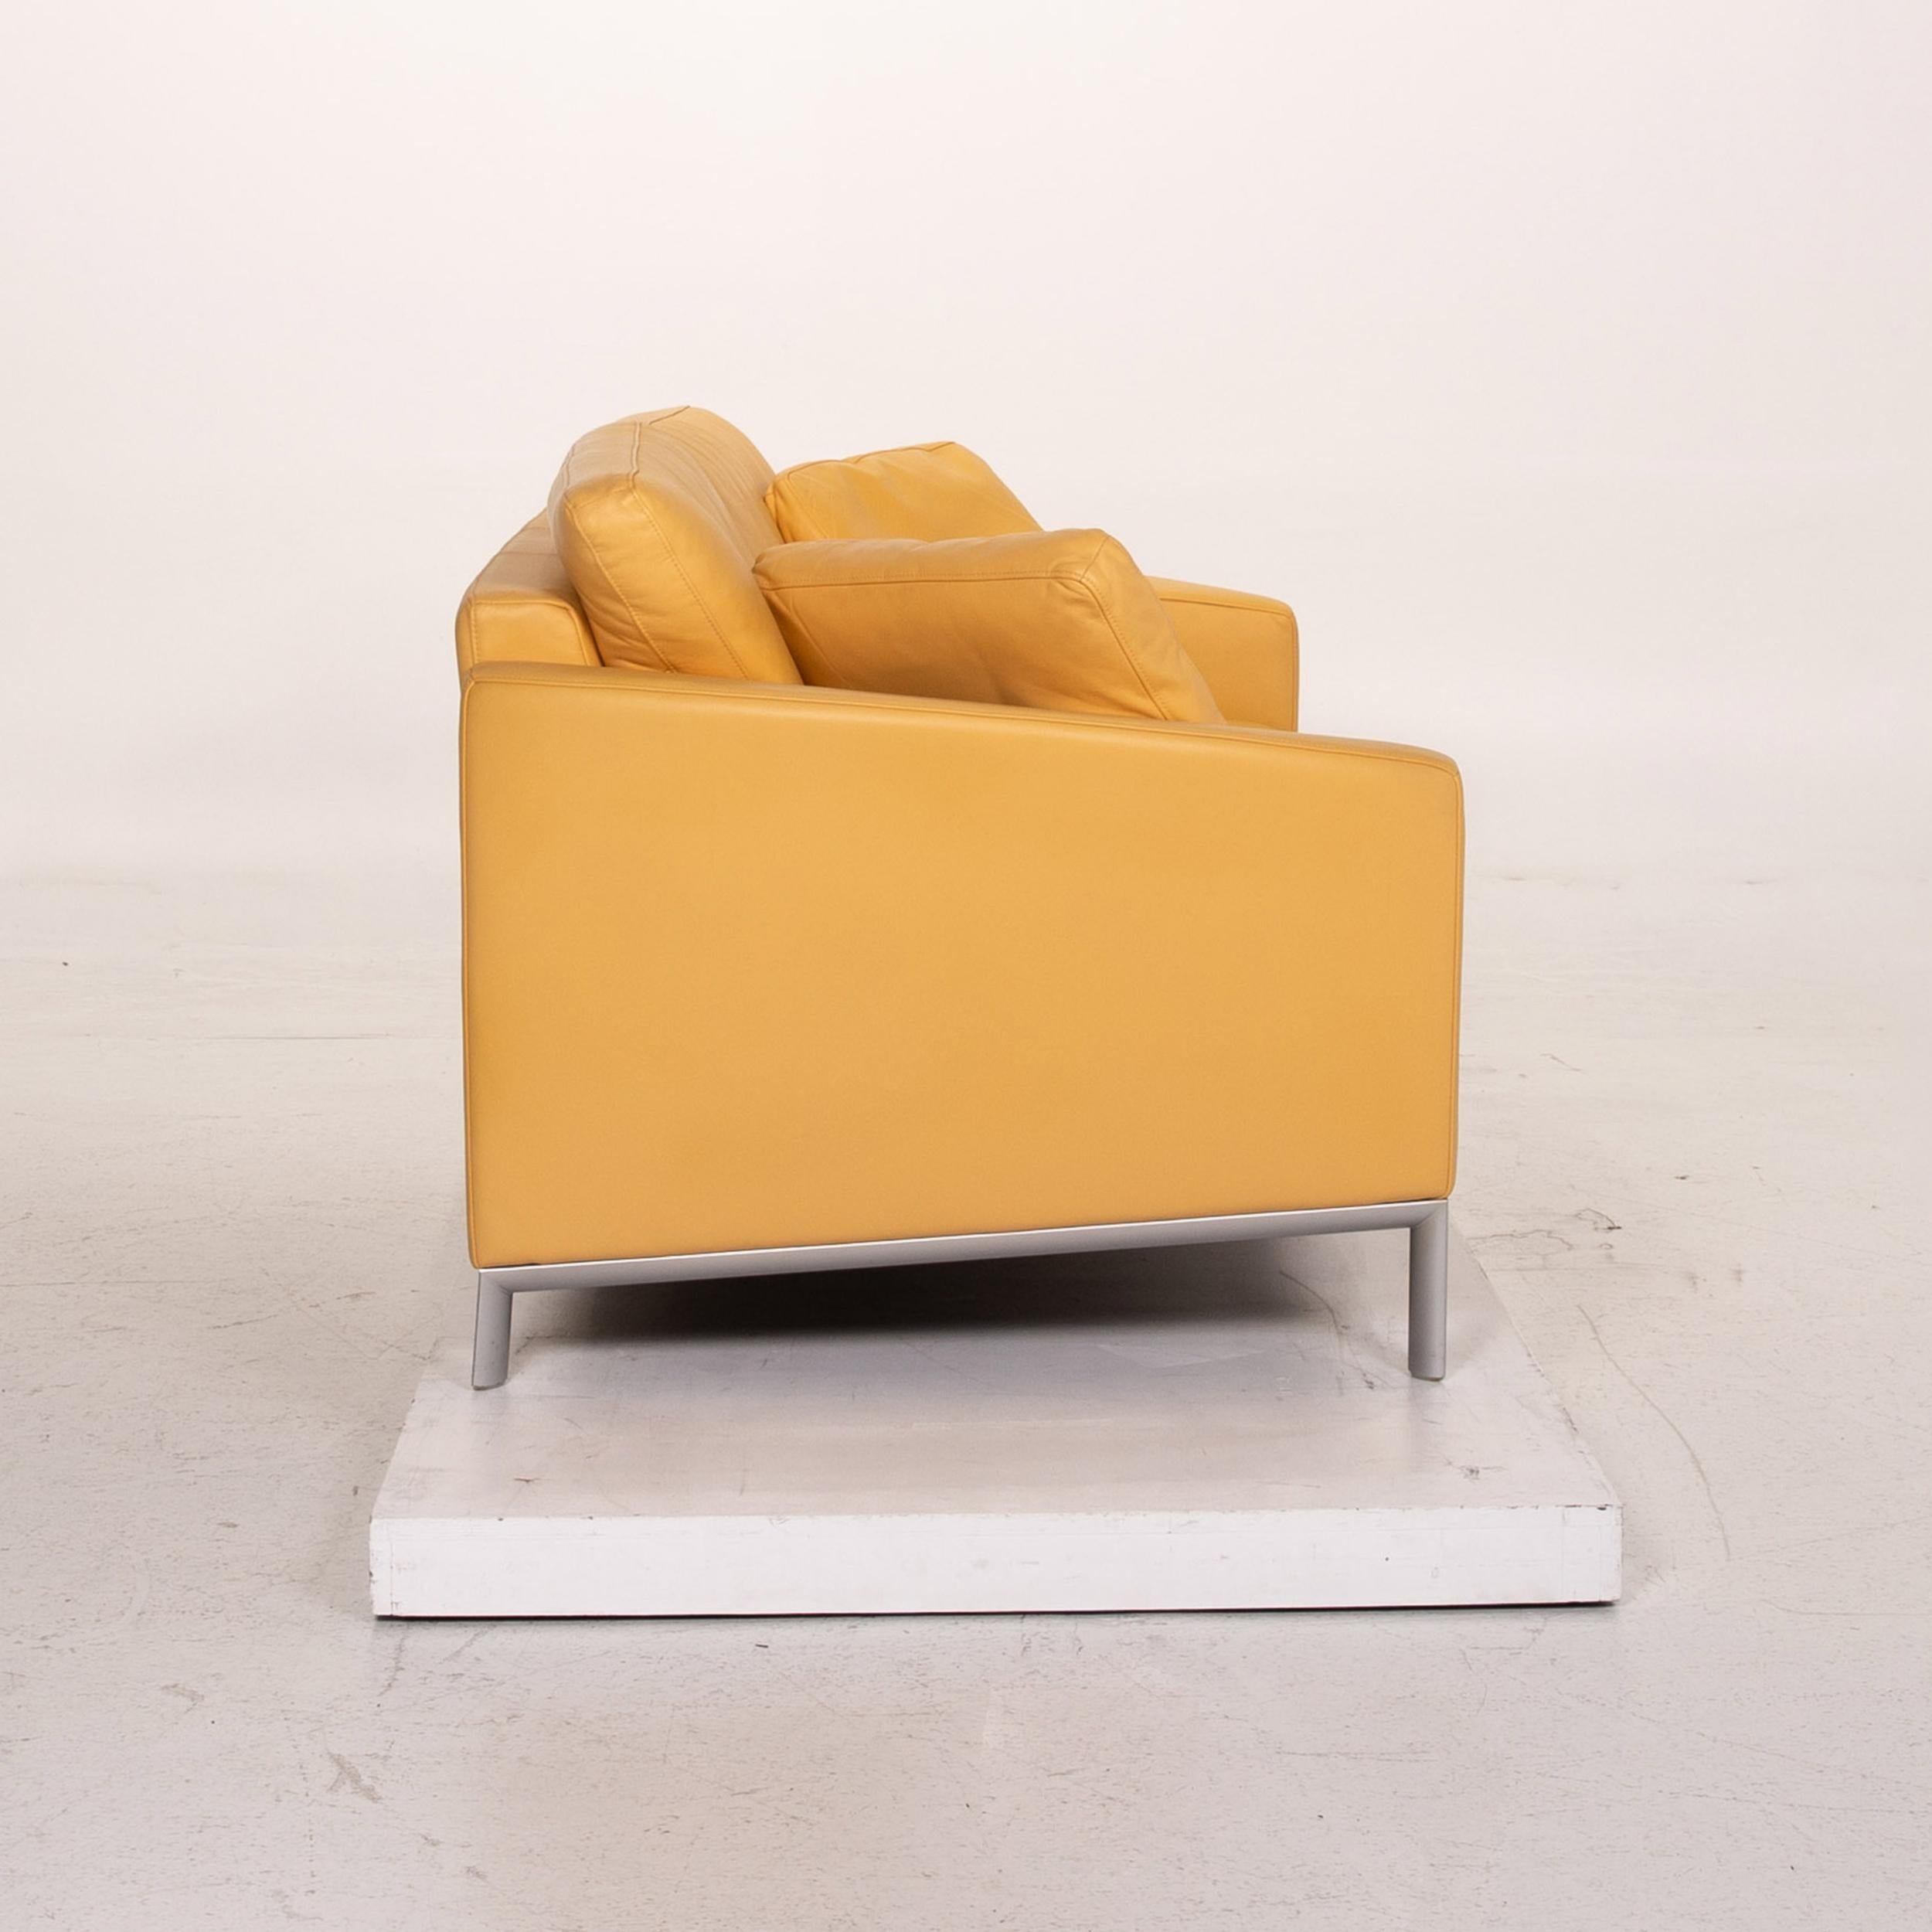 Contemporary Rolf Benz Leather Sofa Yellow Two-Seat Couch For Sale